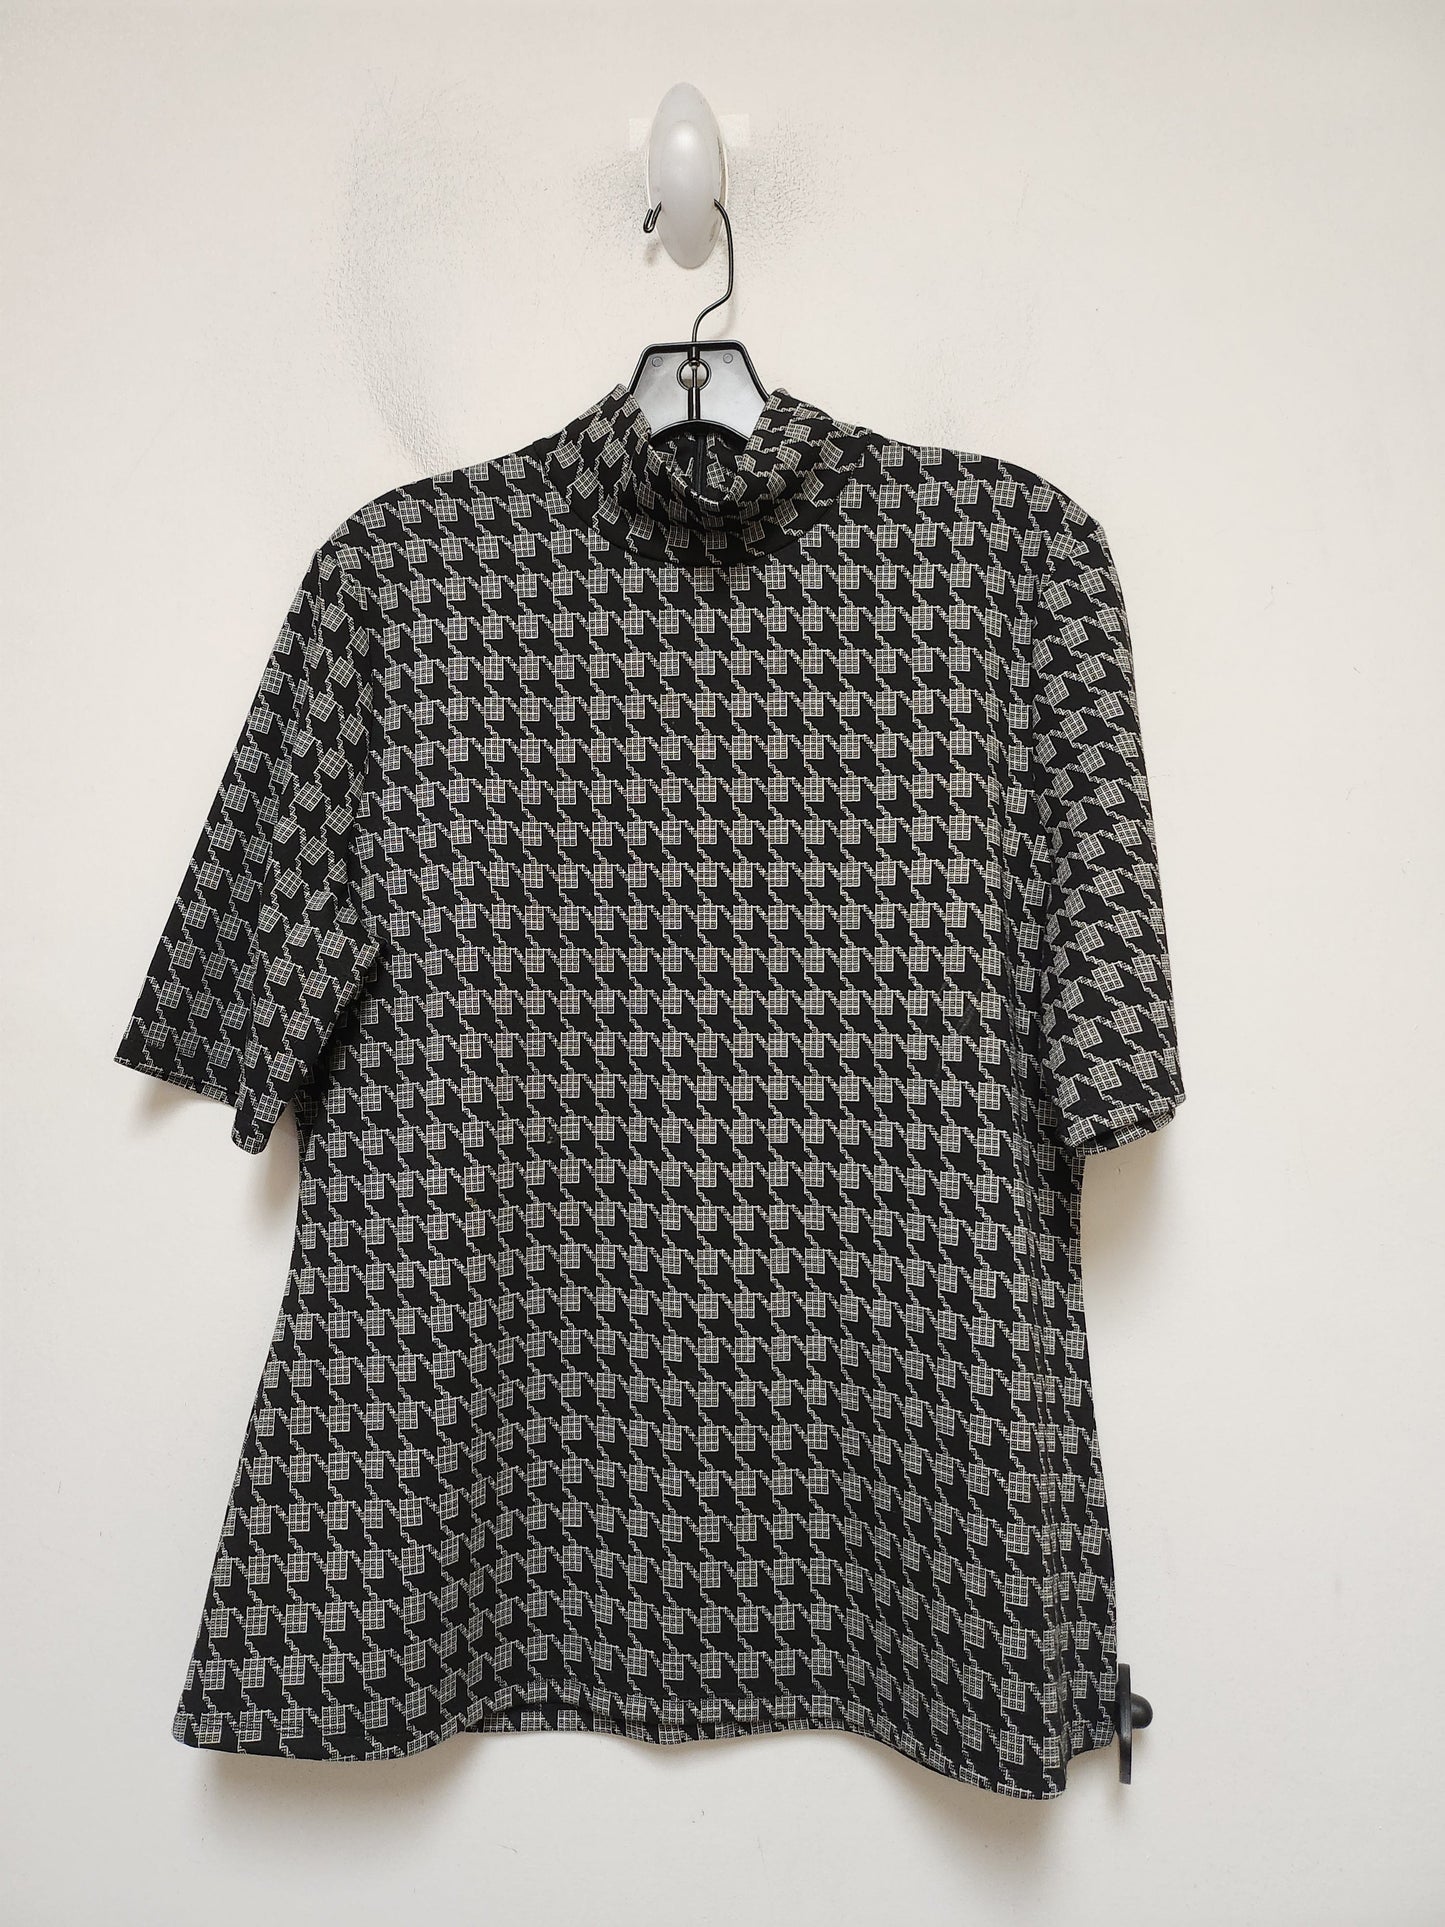 Plaid Pattern Top Short Sleeve New York And Co, Size L